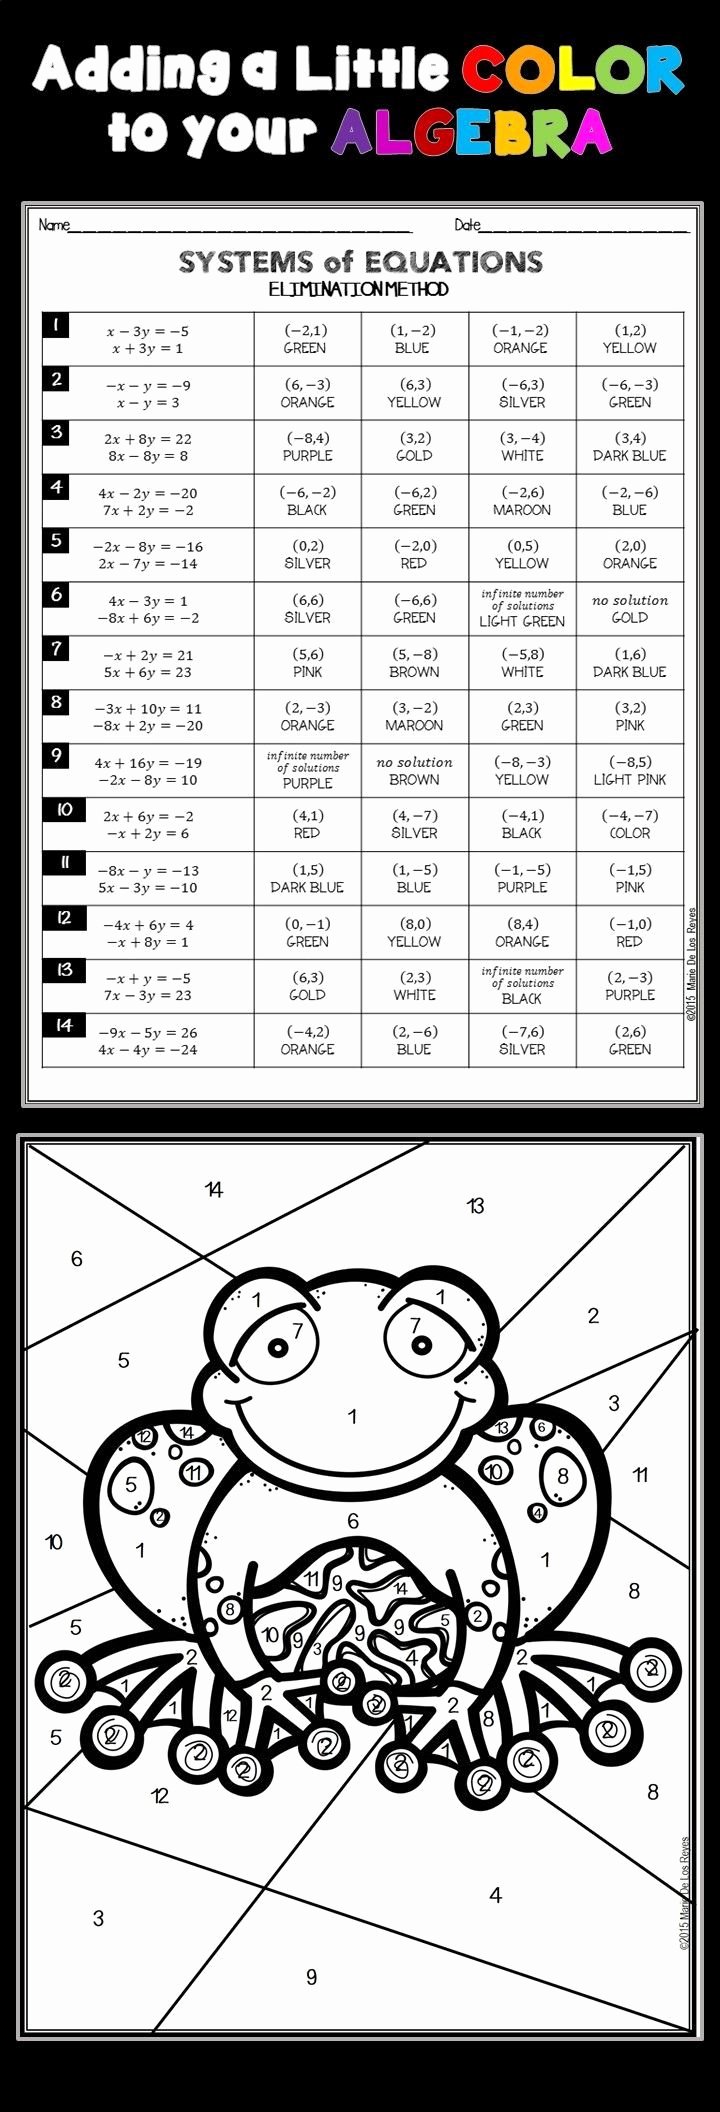 Solving Systems by Elimination Worksheet Awesome solving Systems Of Equations Elimination Method Activity